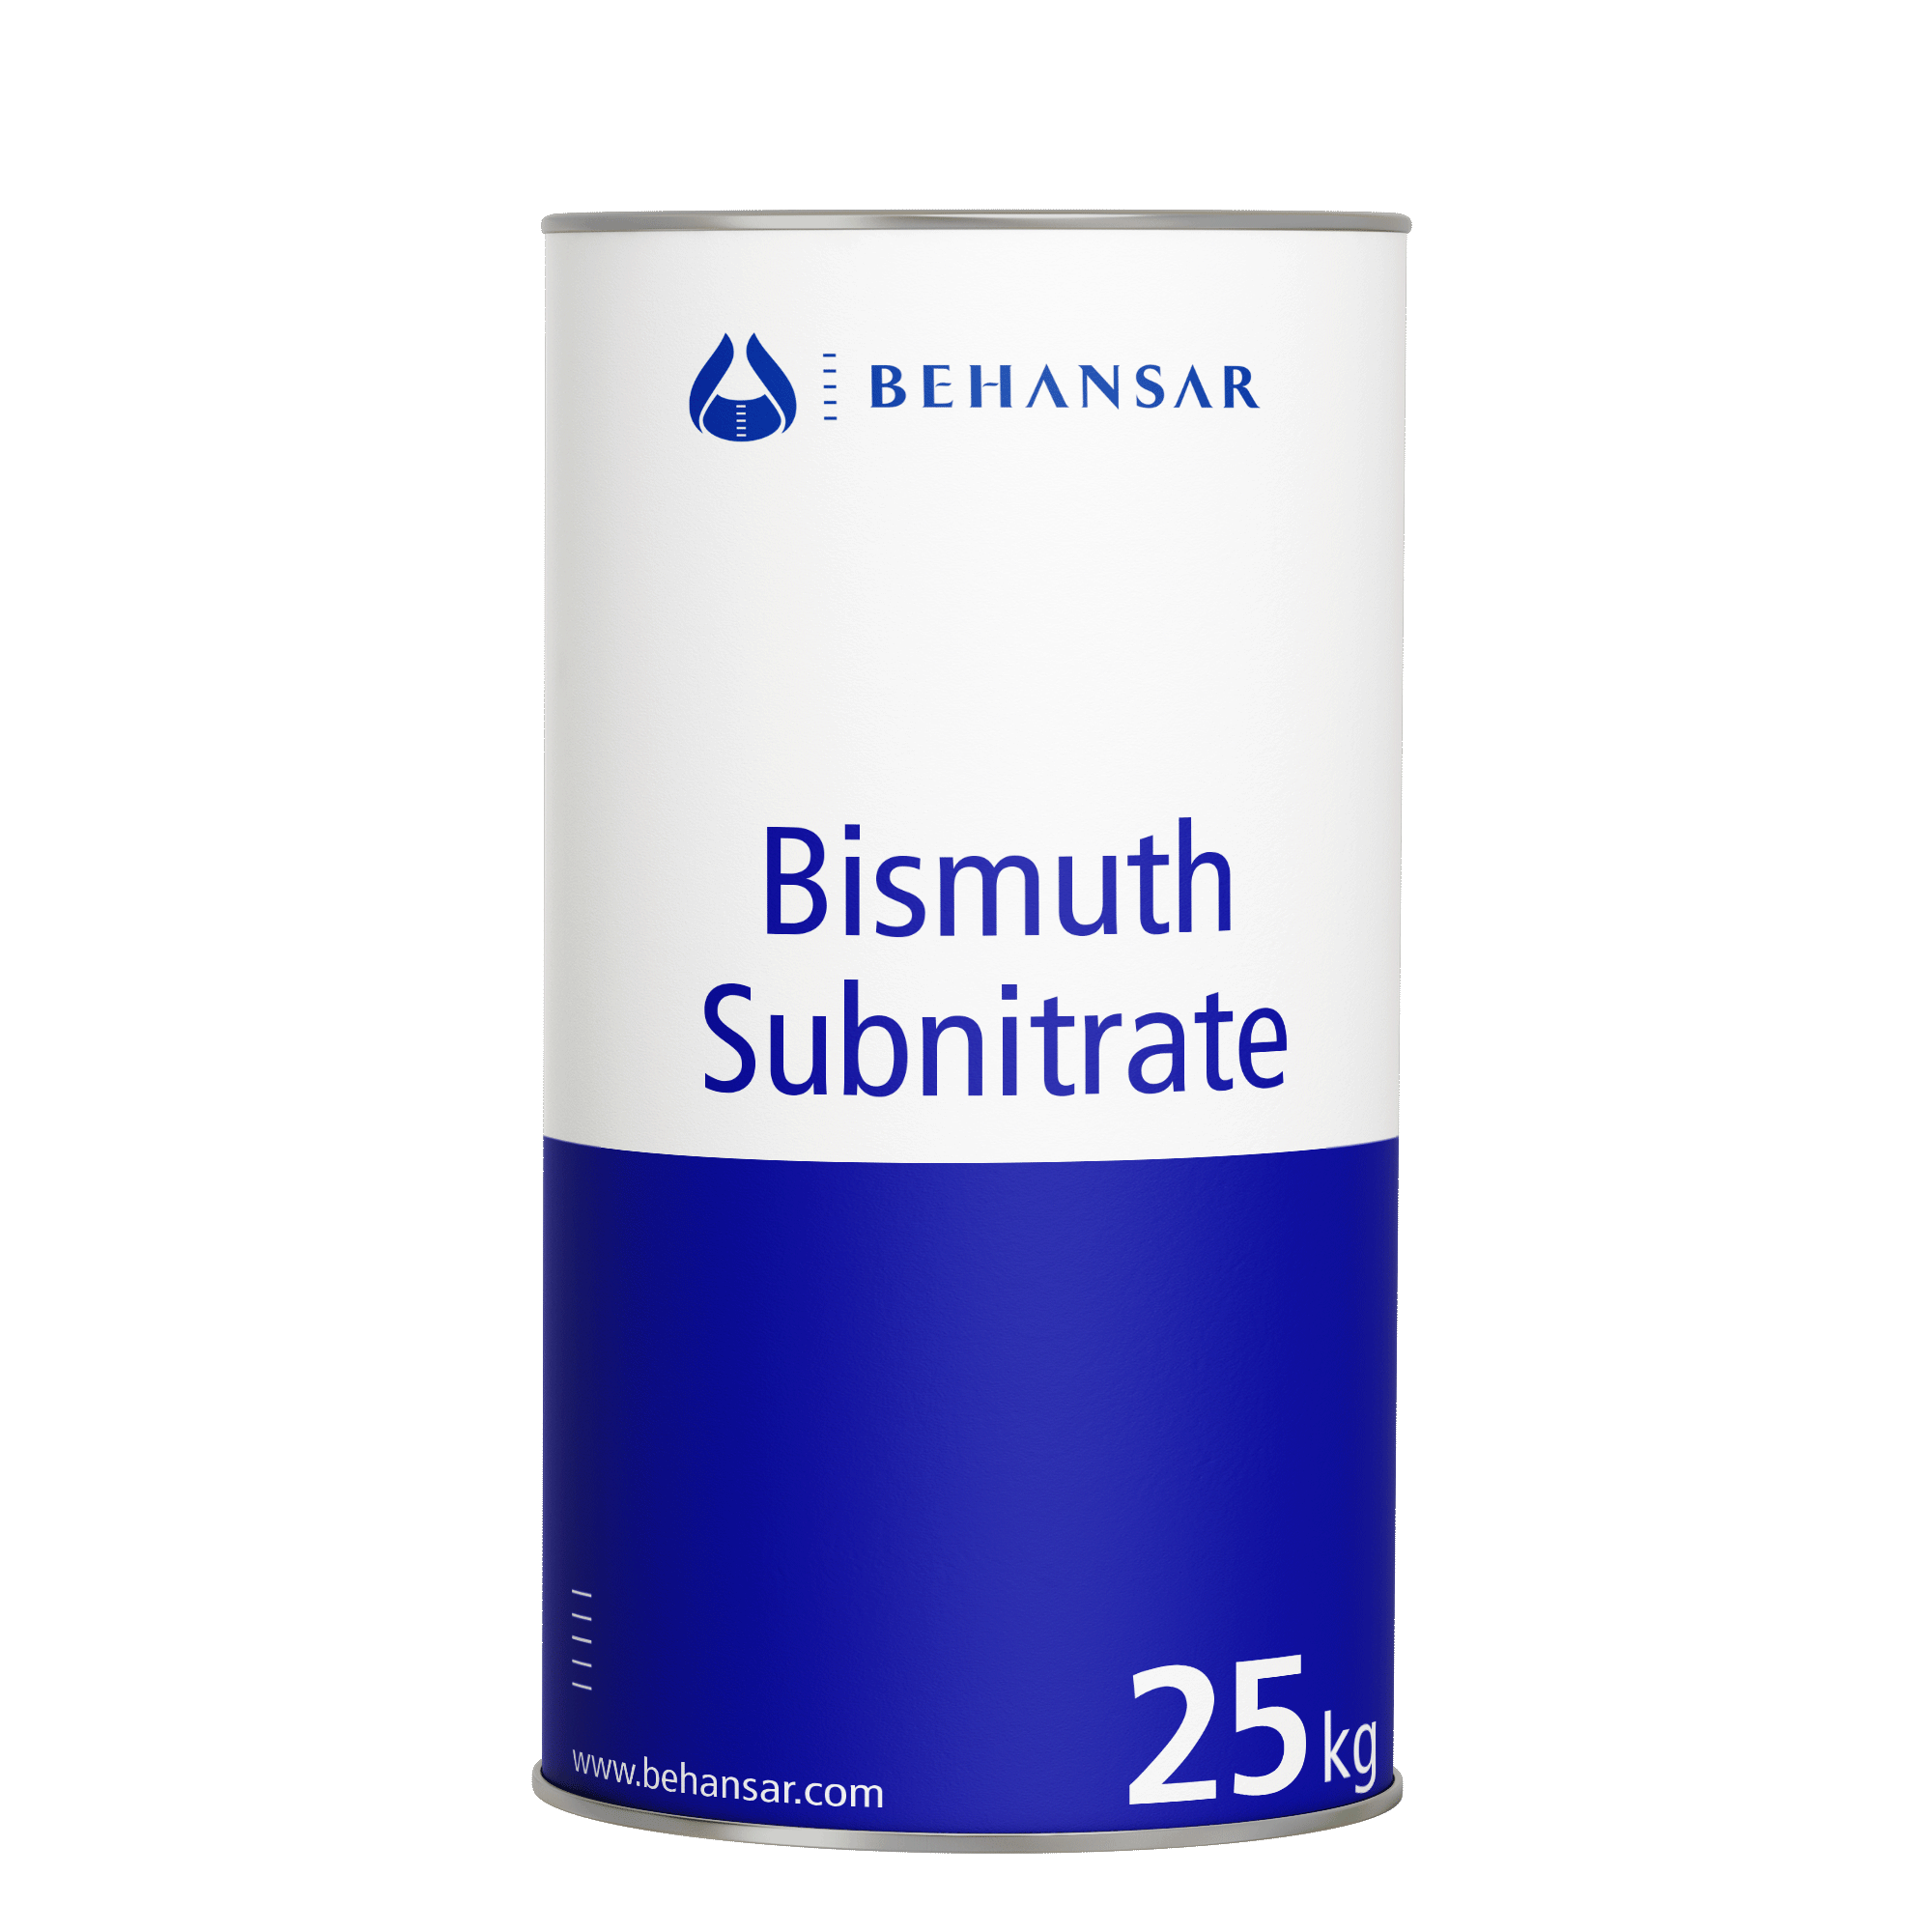 Bismuth Subnitrate is one of the products of Behansar Co